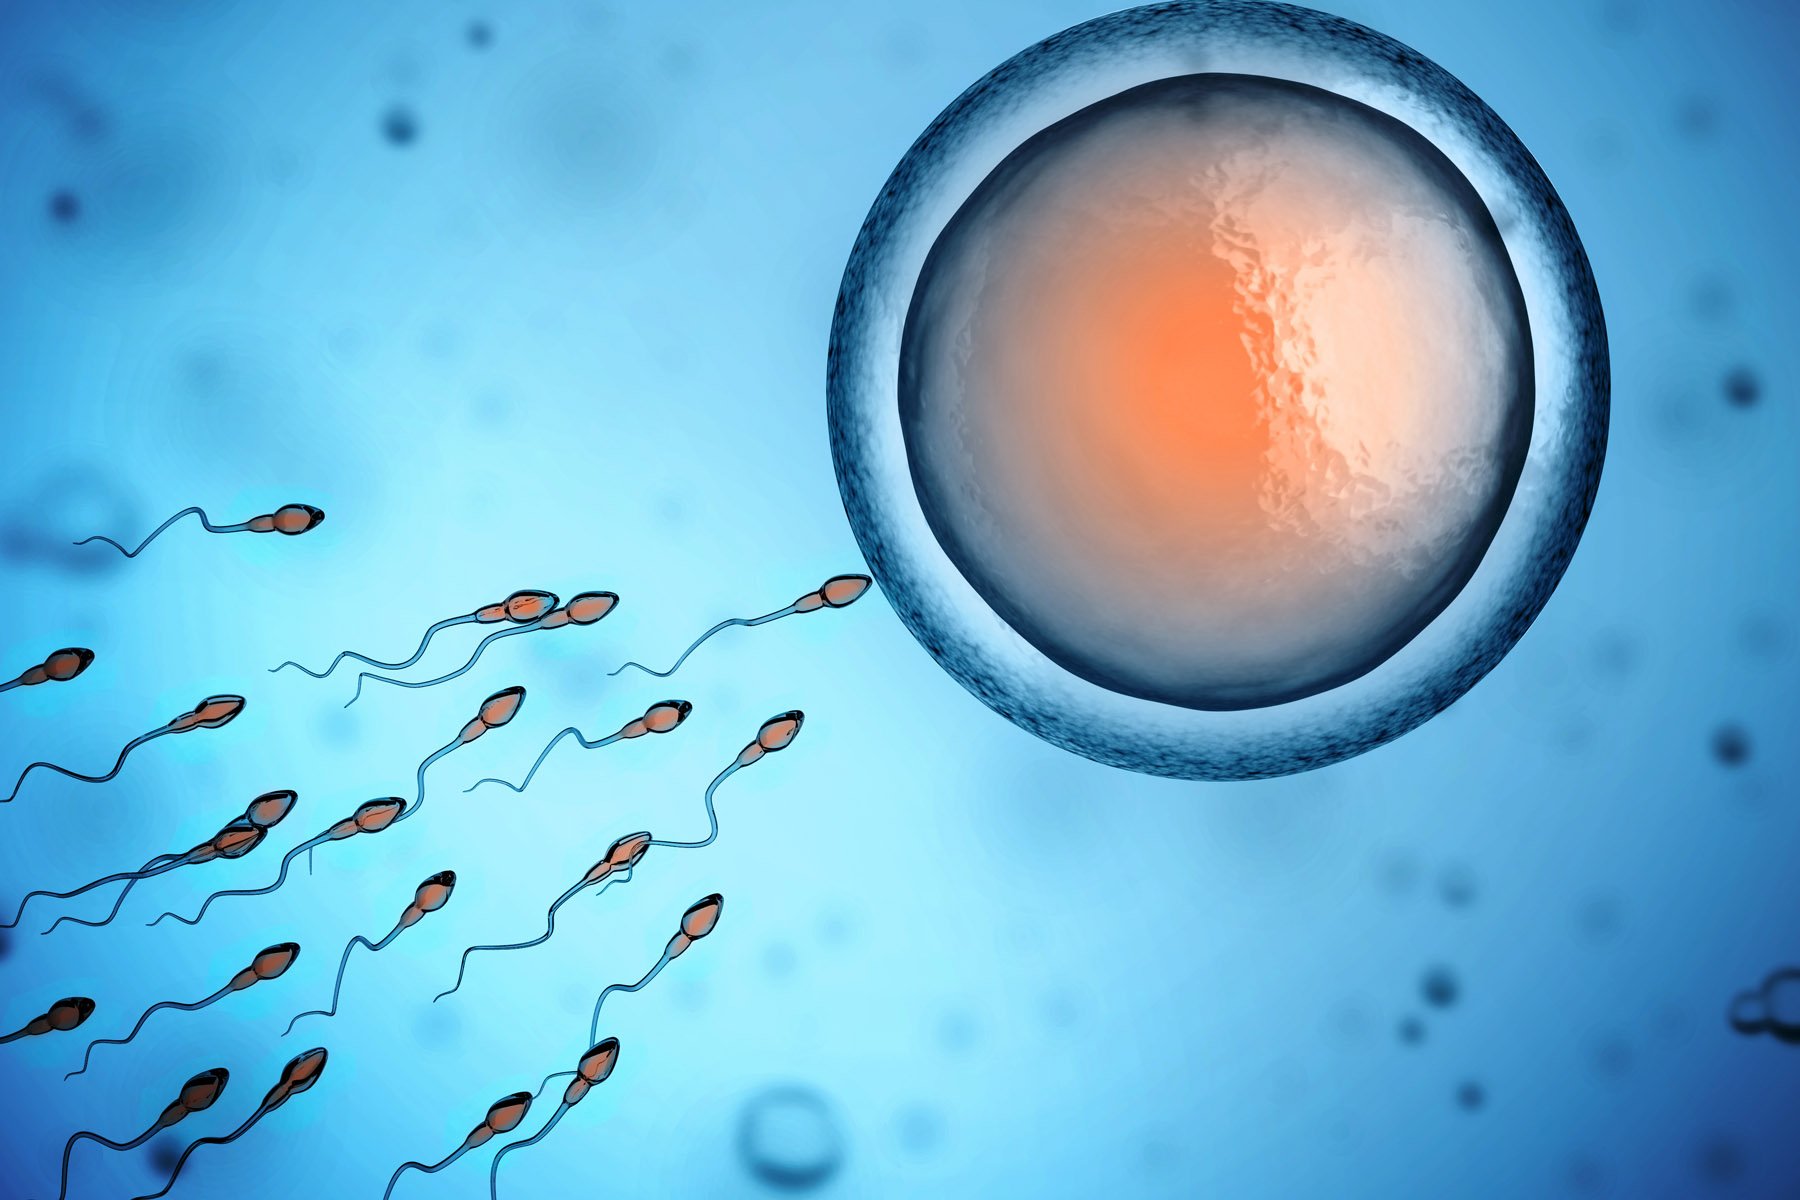 sperm, Abstraction, Abstract, Bokeh, Life, Sex, Sexual, Medical, Dna, Male, Man, Men, 1sperm, Mating, Psychedelic, Egg, Cell, Eggs, Swim, Swimming, Vector Wallpaper